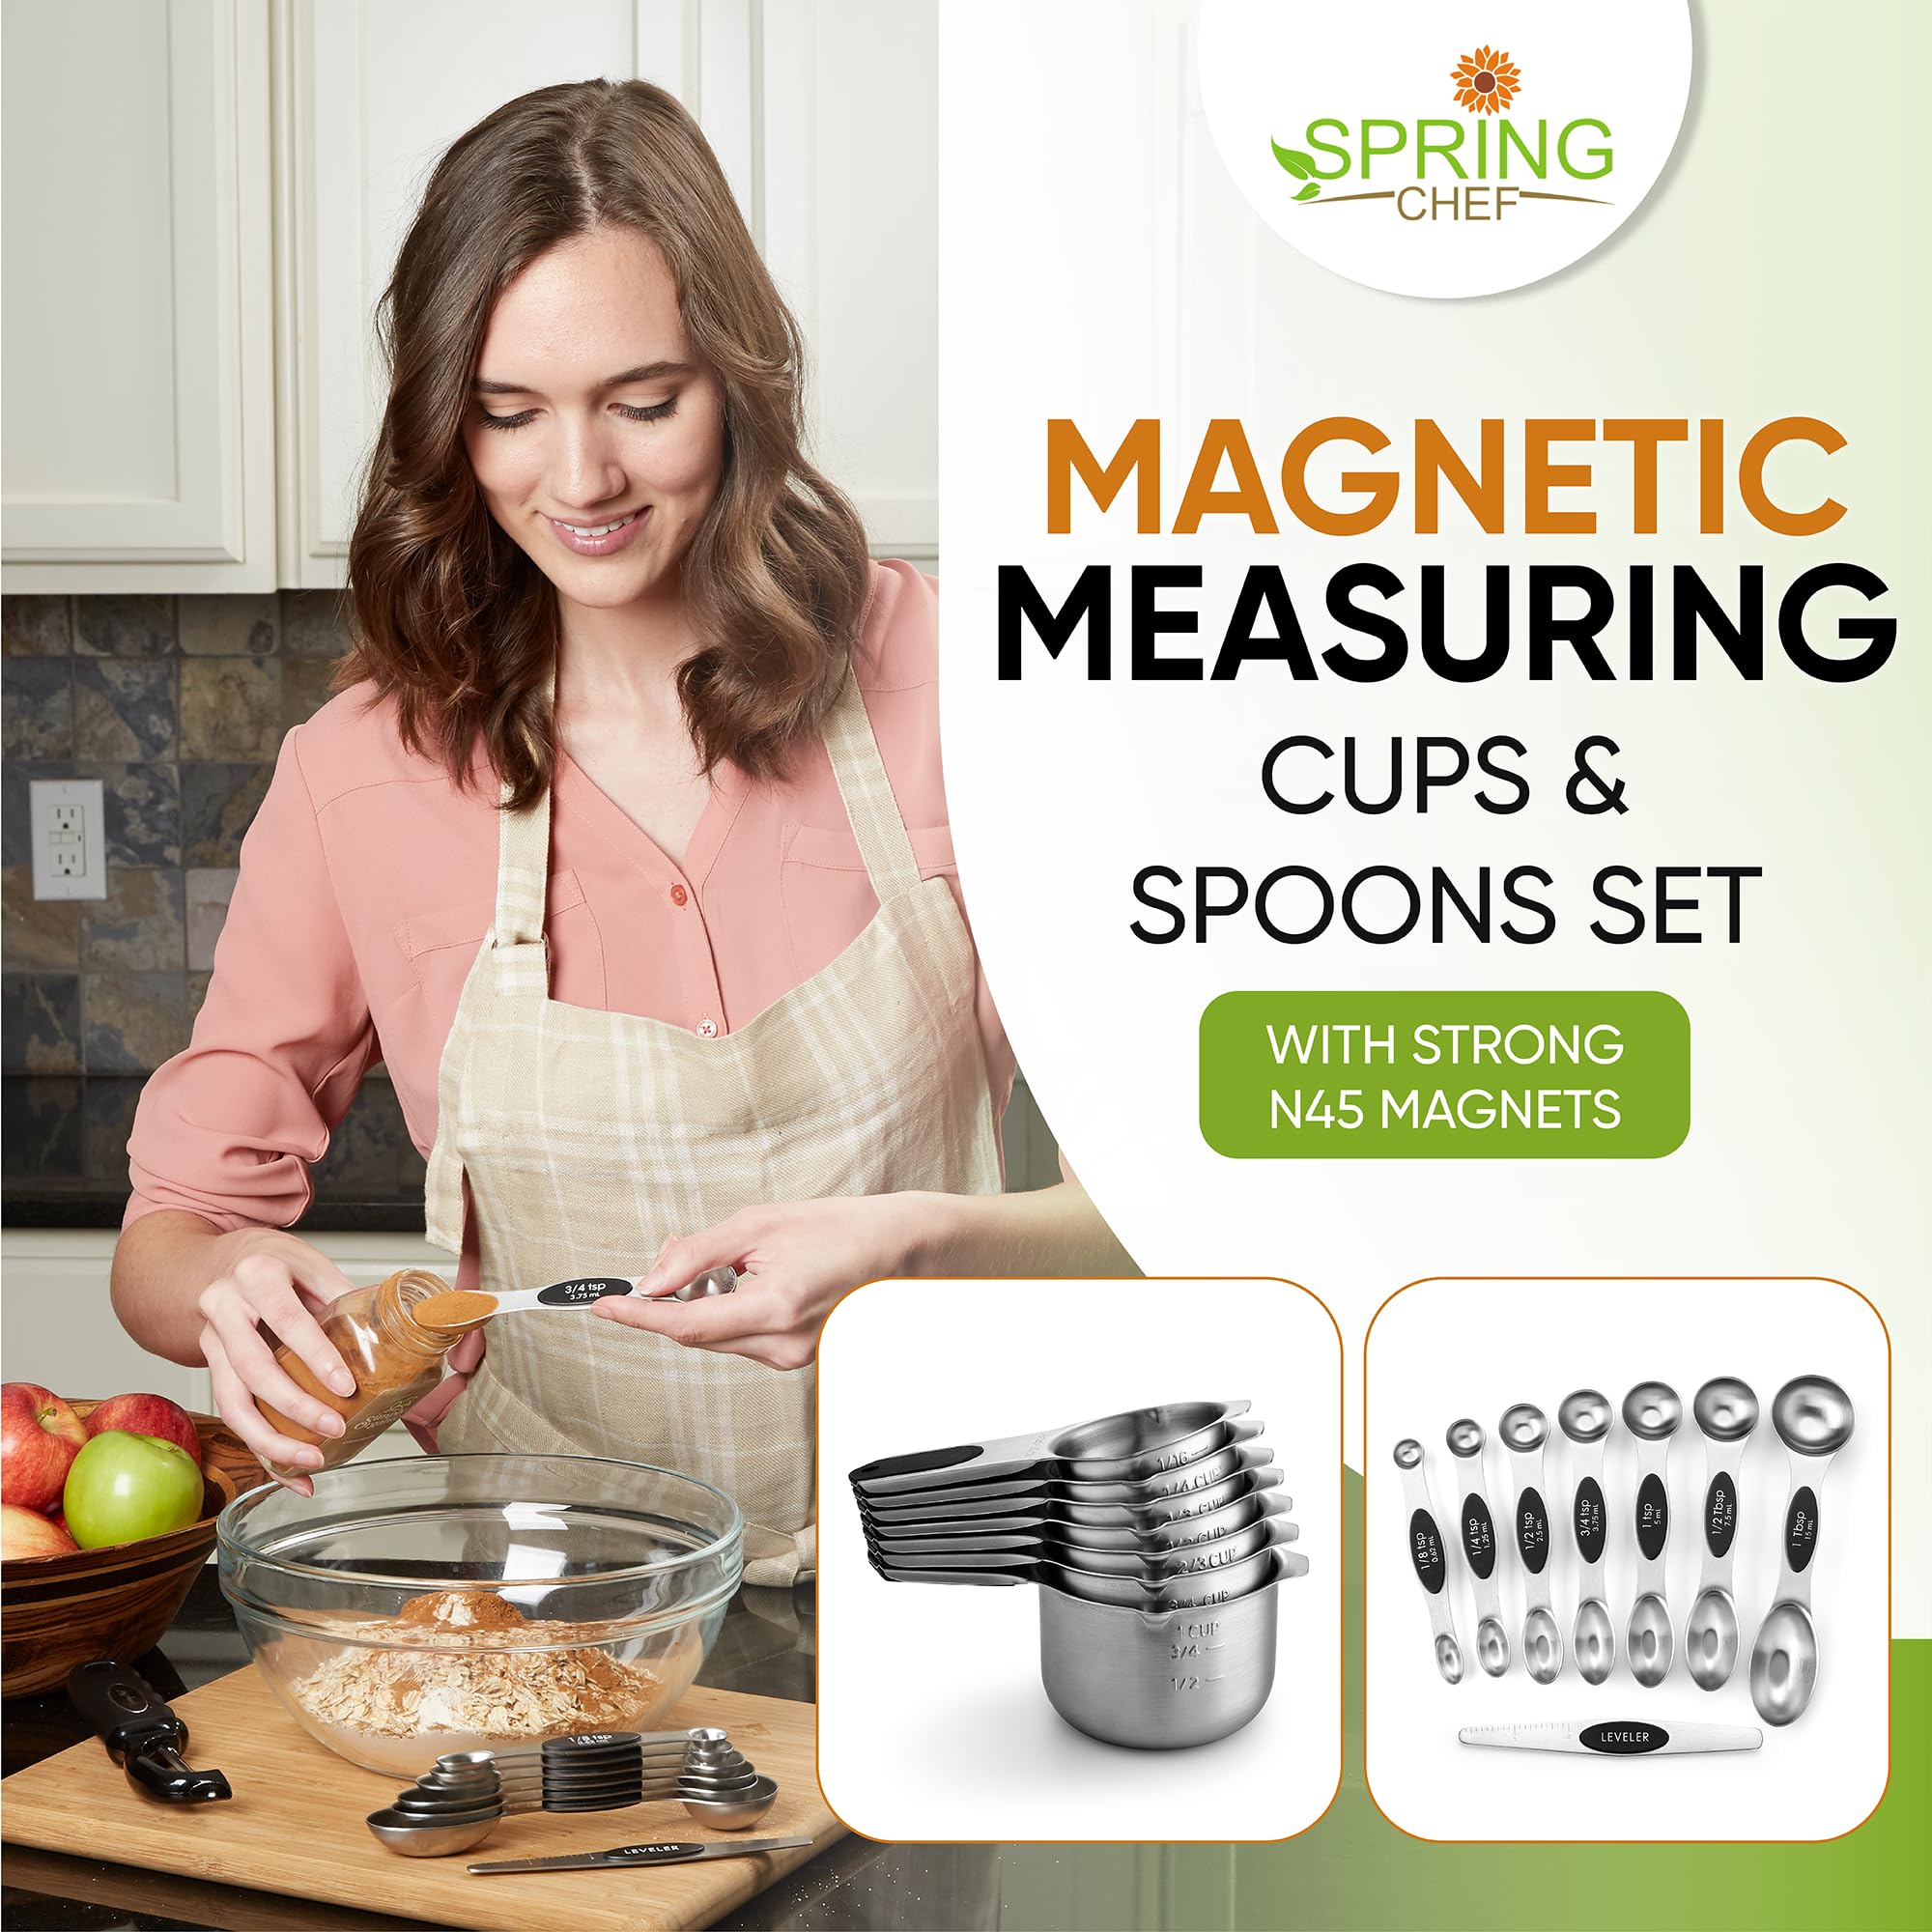 Spring Chef Magnetic Measuring Cups & Spoons Set (Patent Pending), Strong N45 Magnets, Heavy Duty Stainless Steel Fits in Spice Jars for Baking & Cooking, BPA Free, Round Set of 15 with Leveler, Black